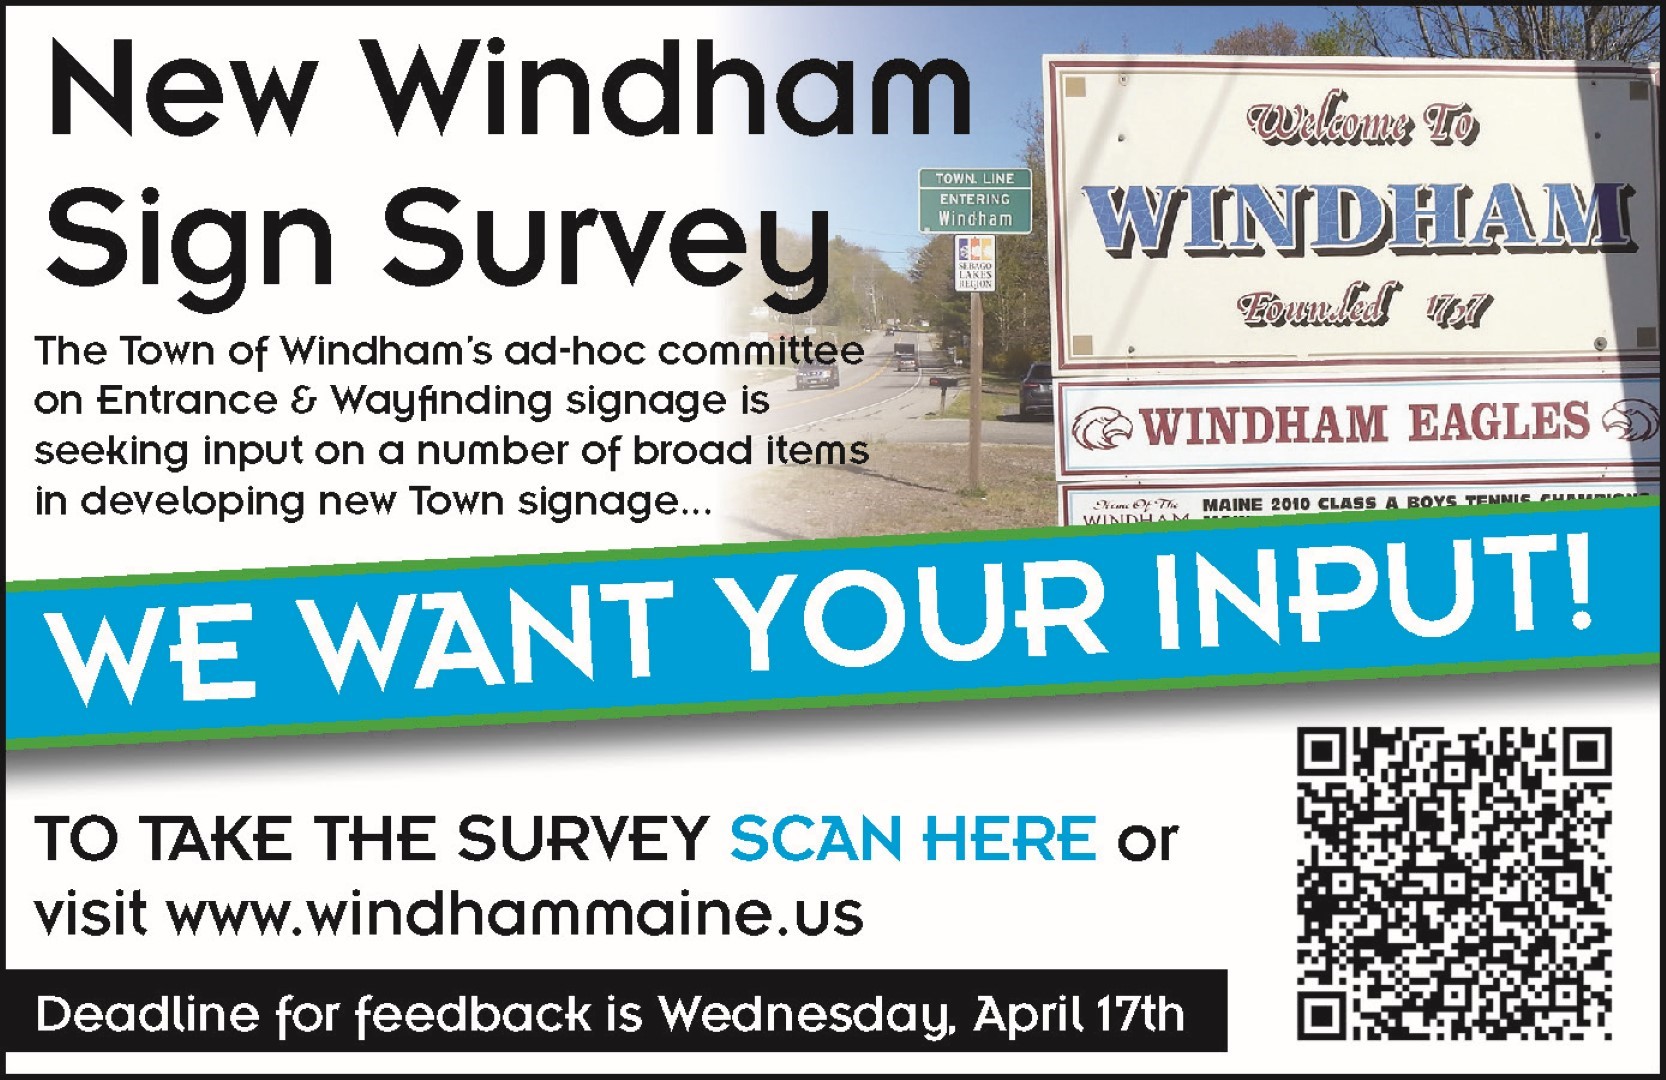 http://www.thewindhameagle.com/ads/townofwindham.jpg